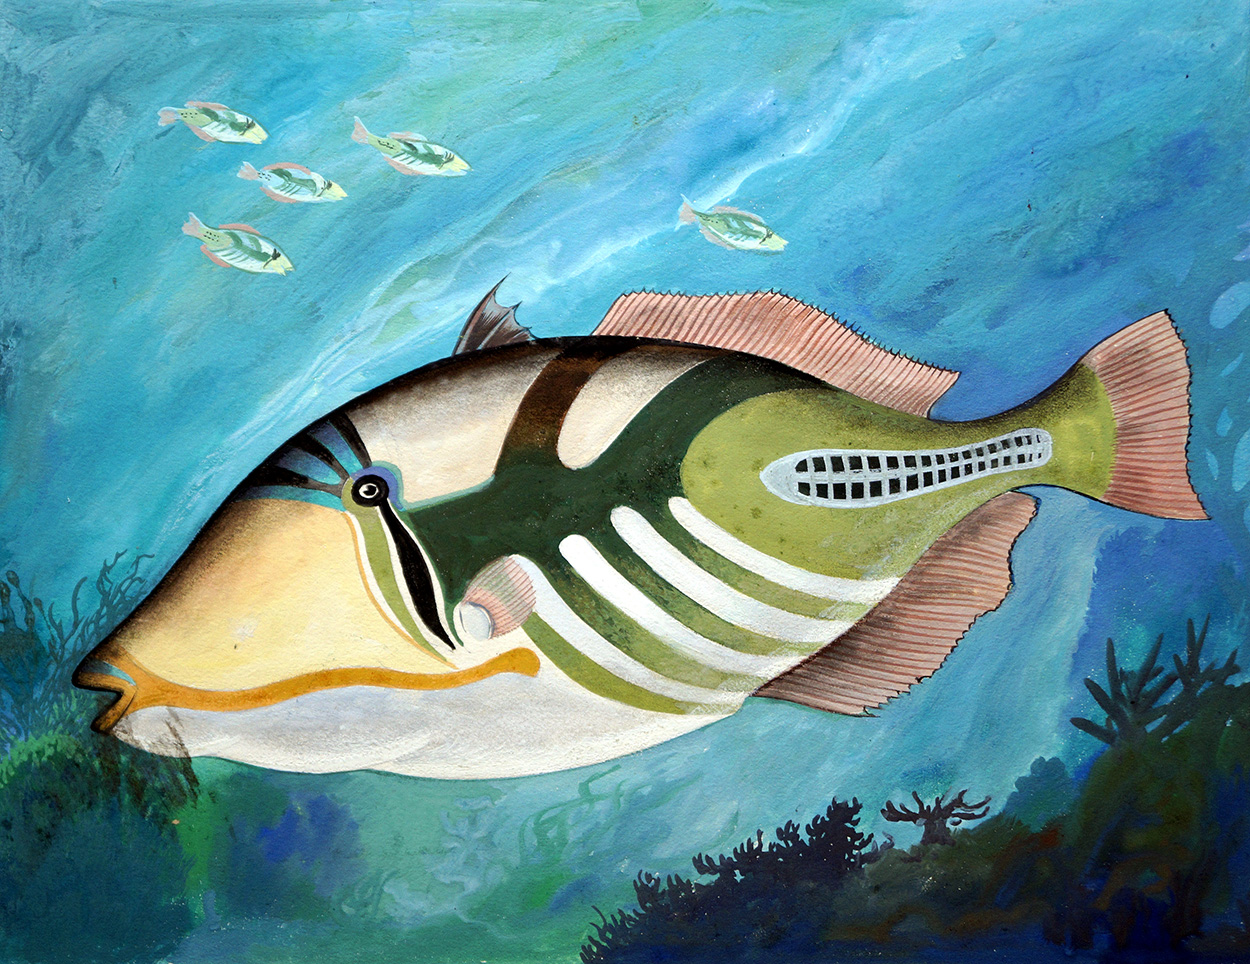 Tropical Fish (Original) art by Clive Uptton at The Illustration Art Gallery